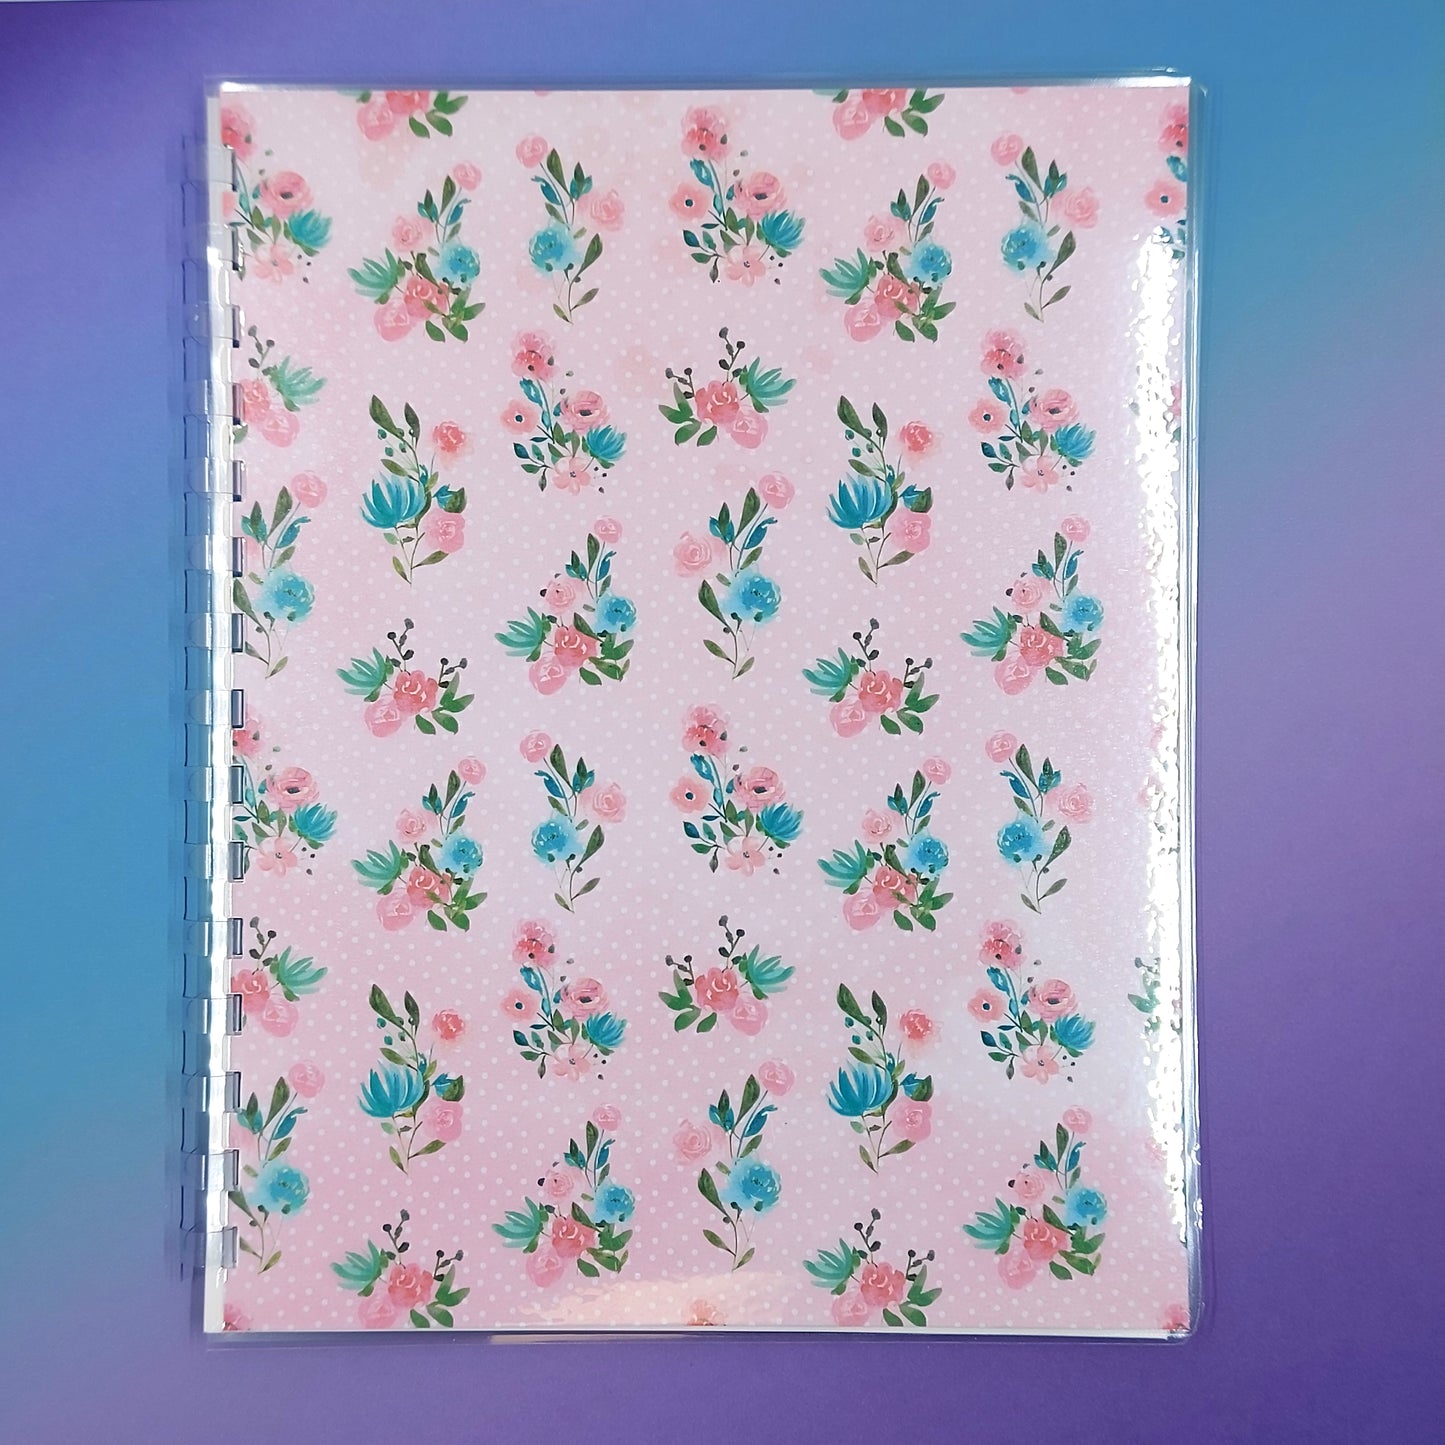 Large 7x9 Reusable Sticker Storage Book - Pink with Floral Clusters